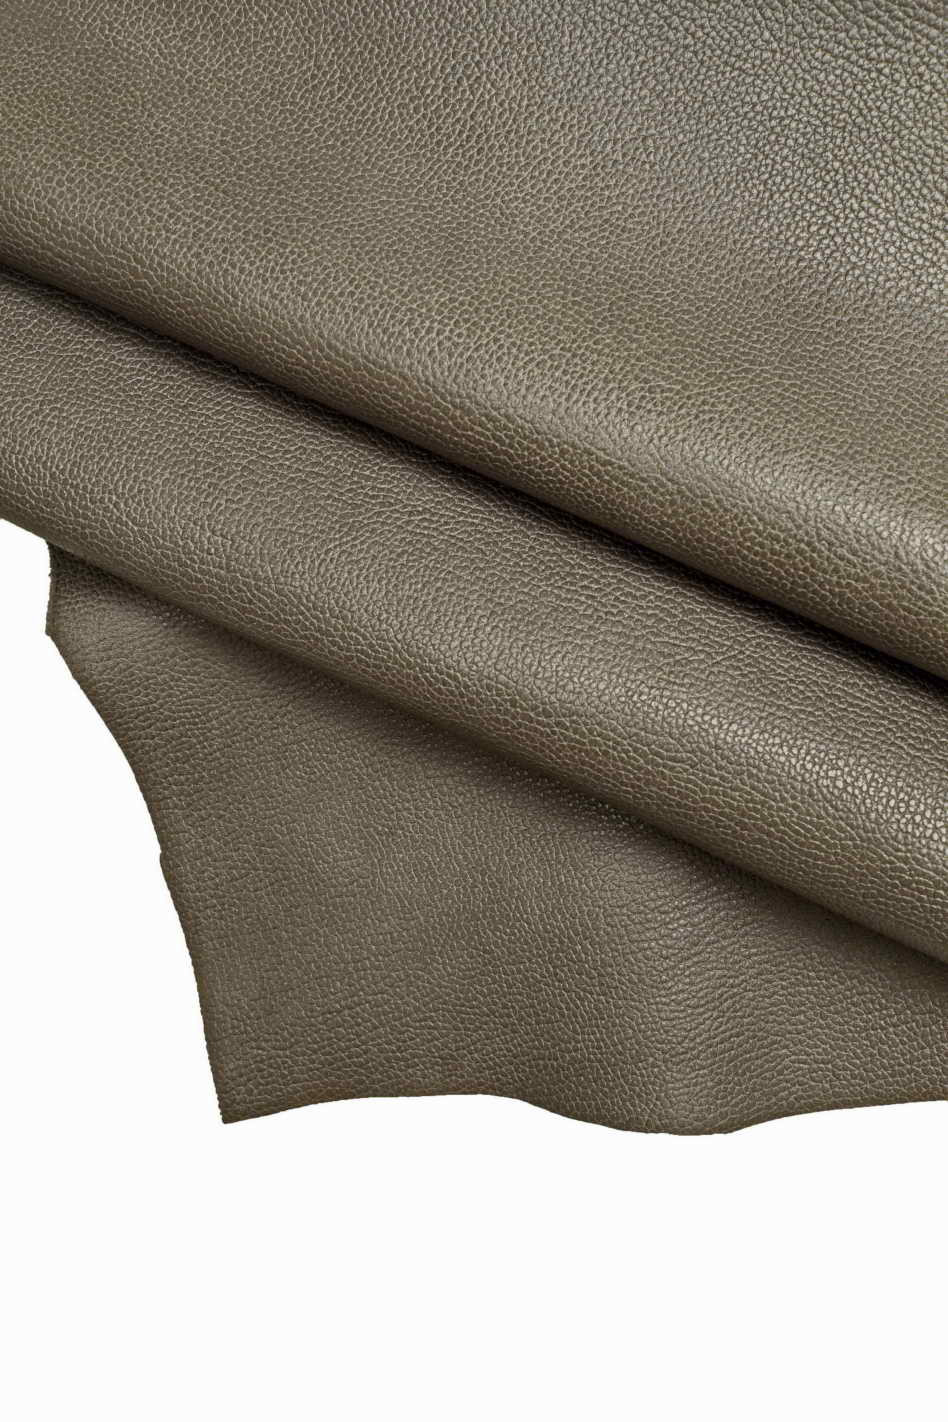  Wento 1.8mm Thick Solid Genuine Leather Finished,Cow